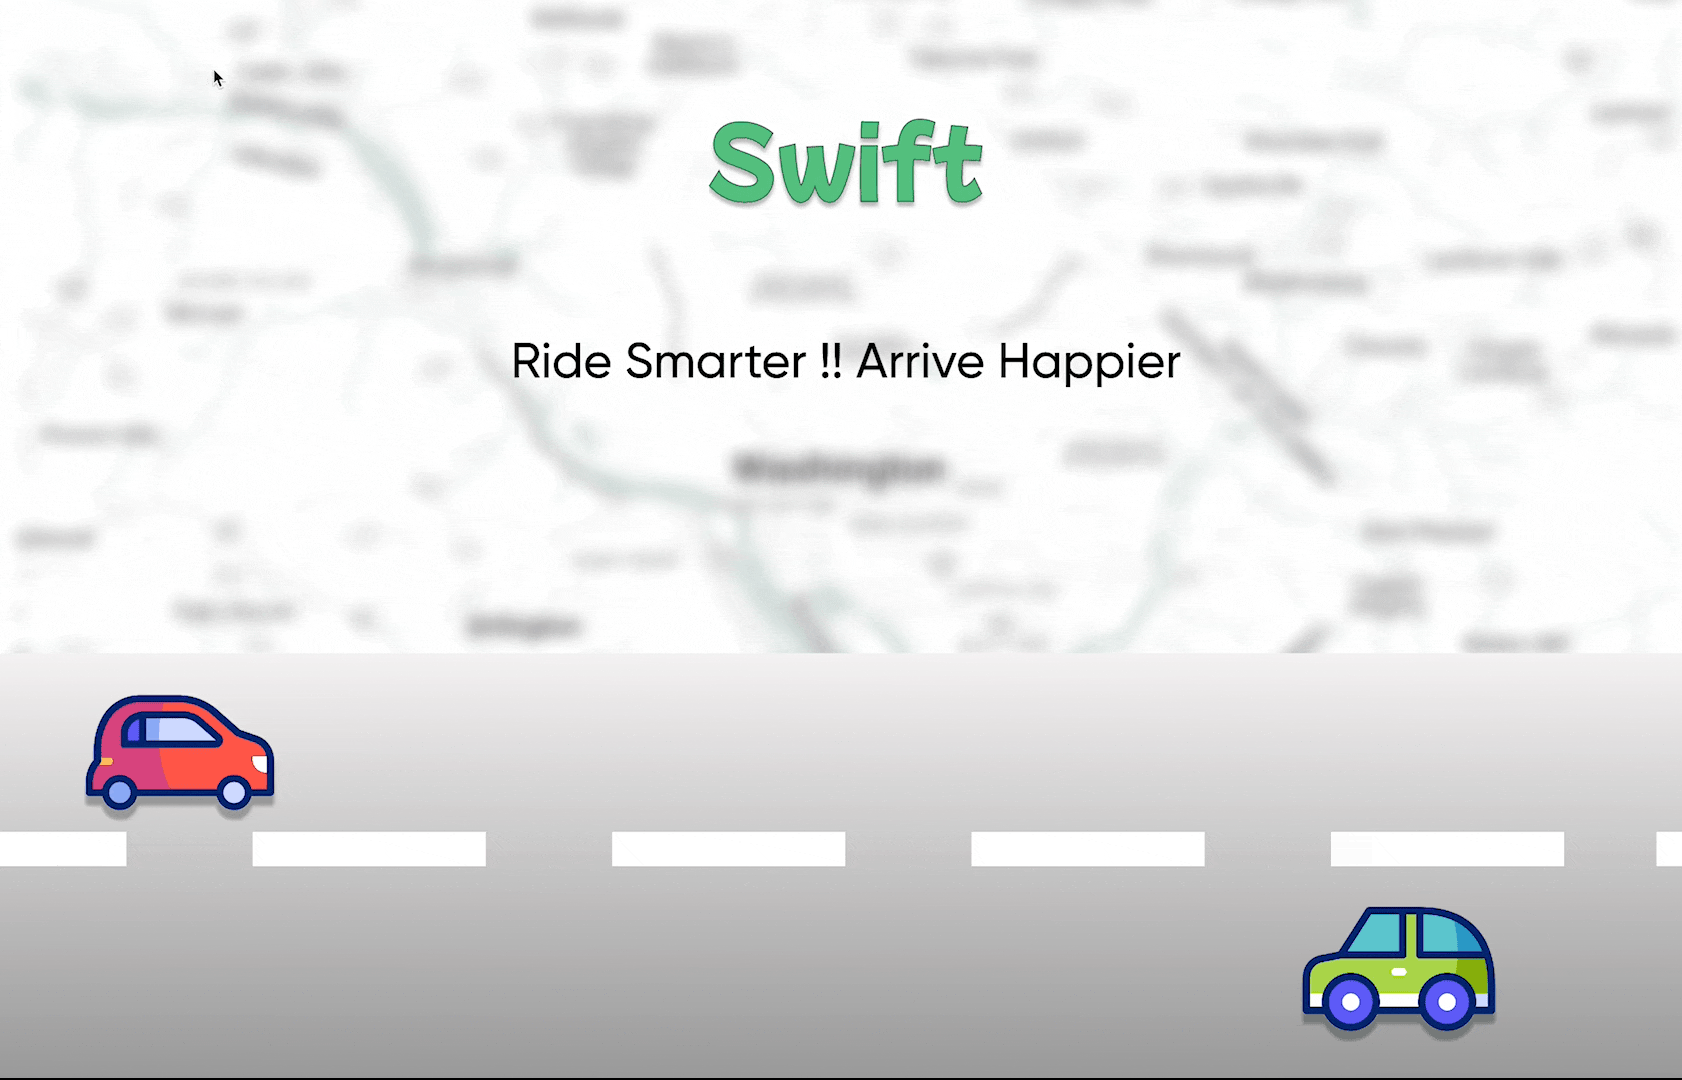 Never Late! with " SWIFT " branding car city design graphic design online taxi street swift taxi taxi app ui usa user experience ux design uxui